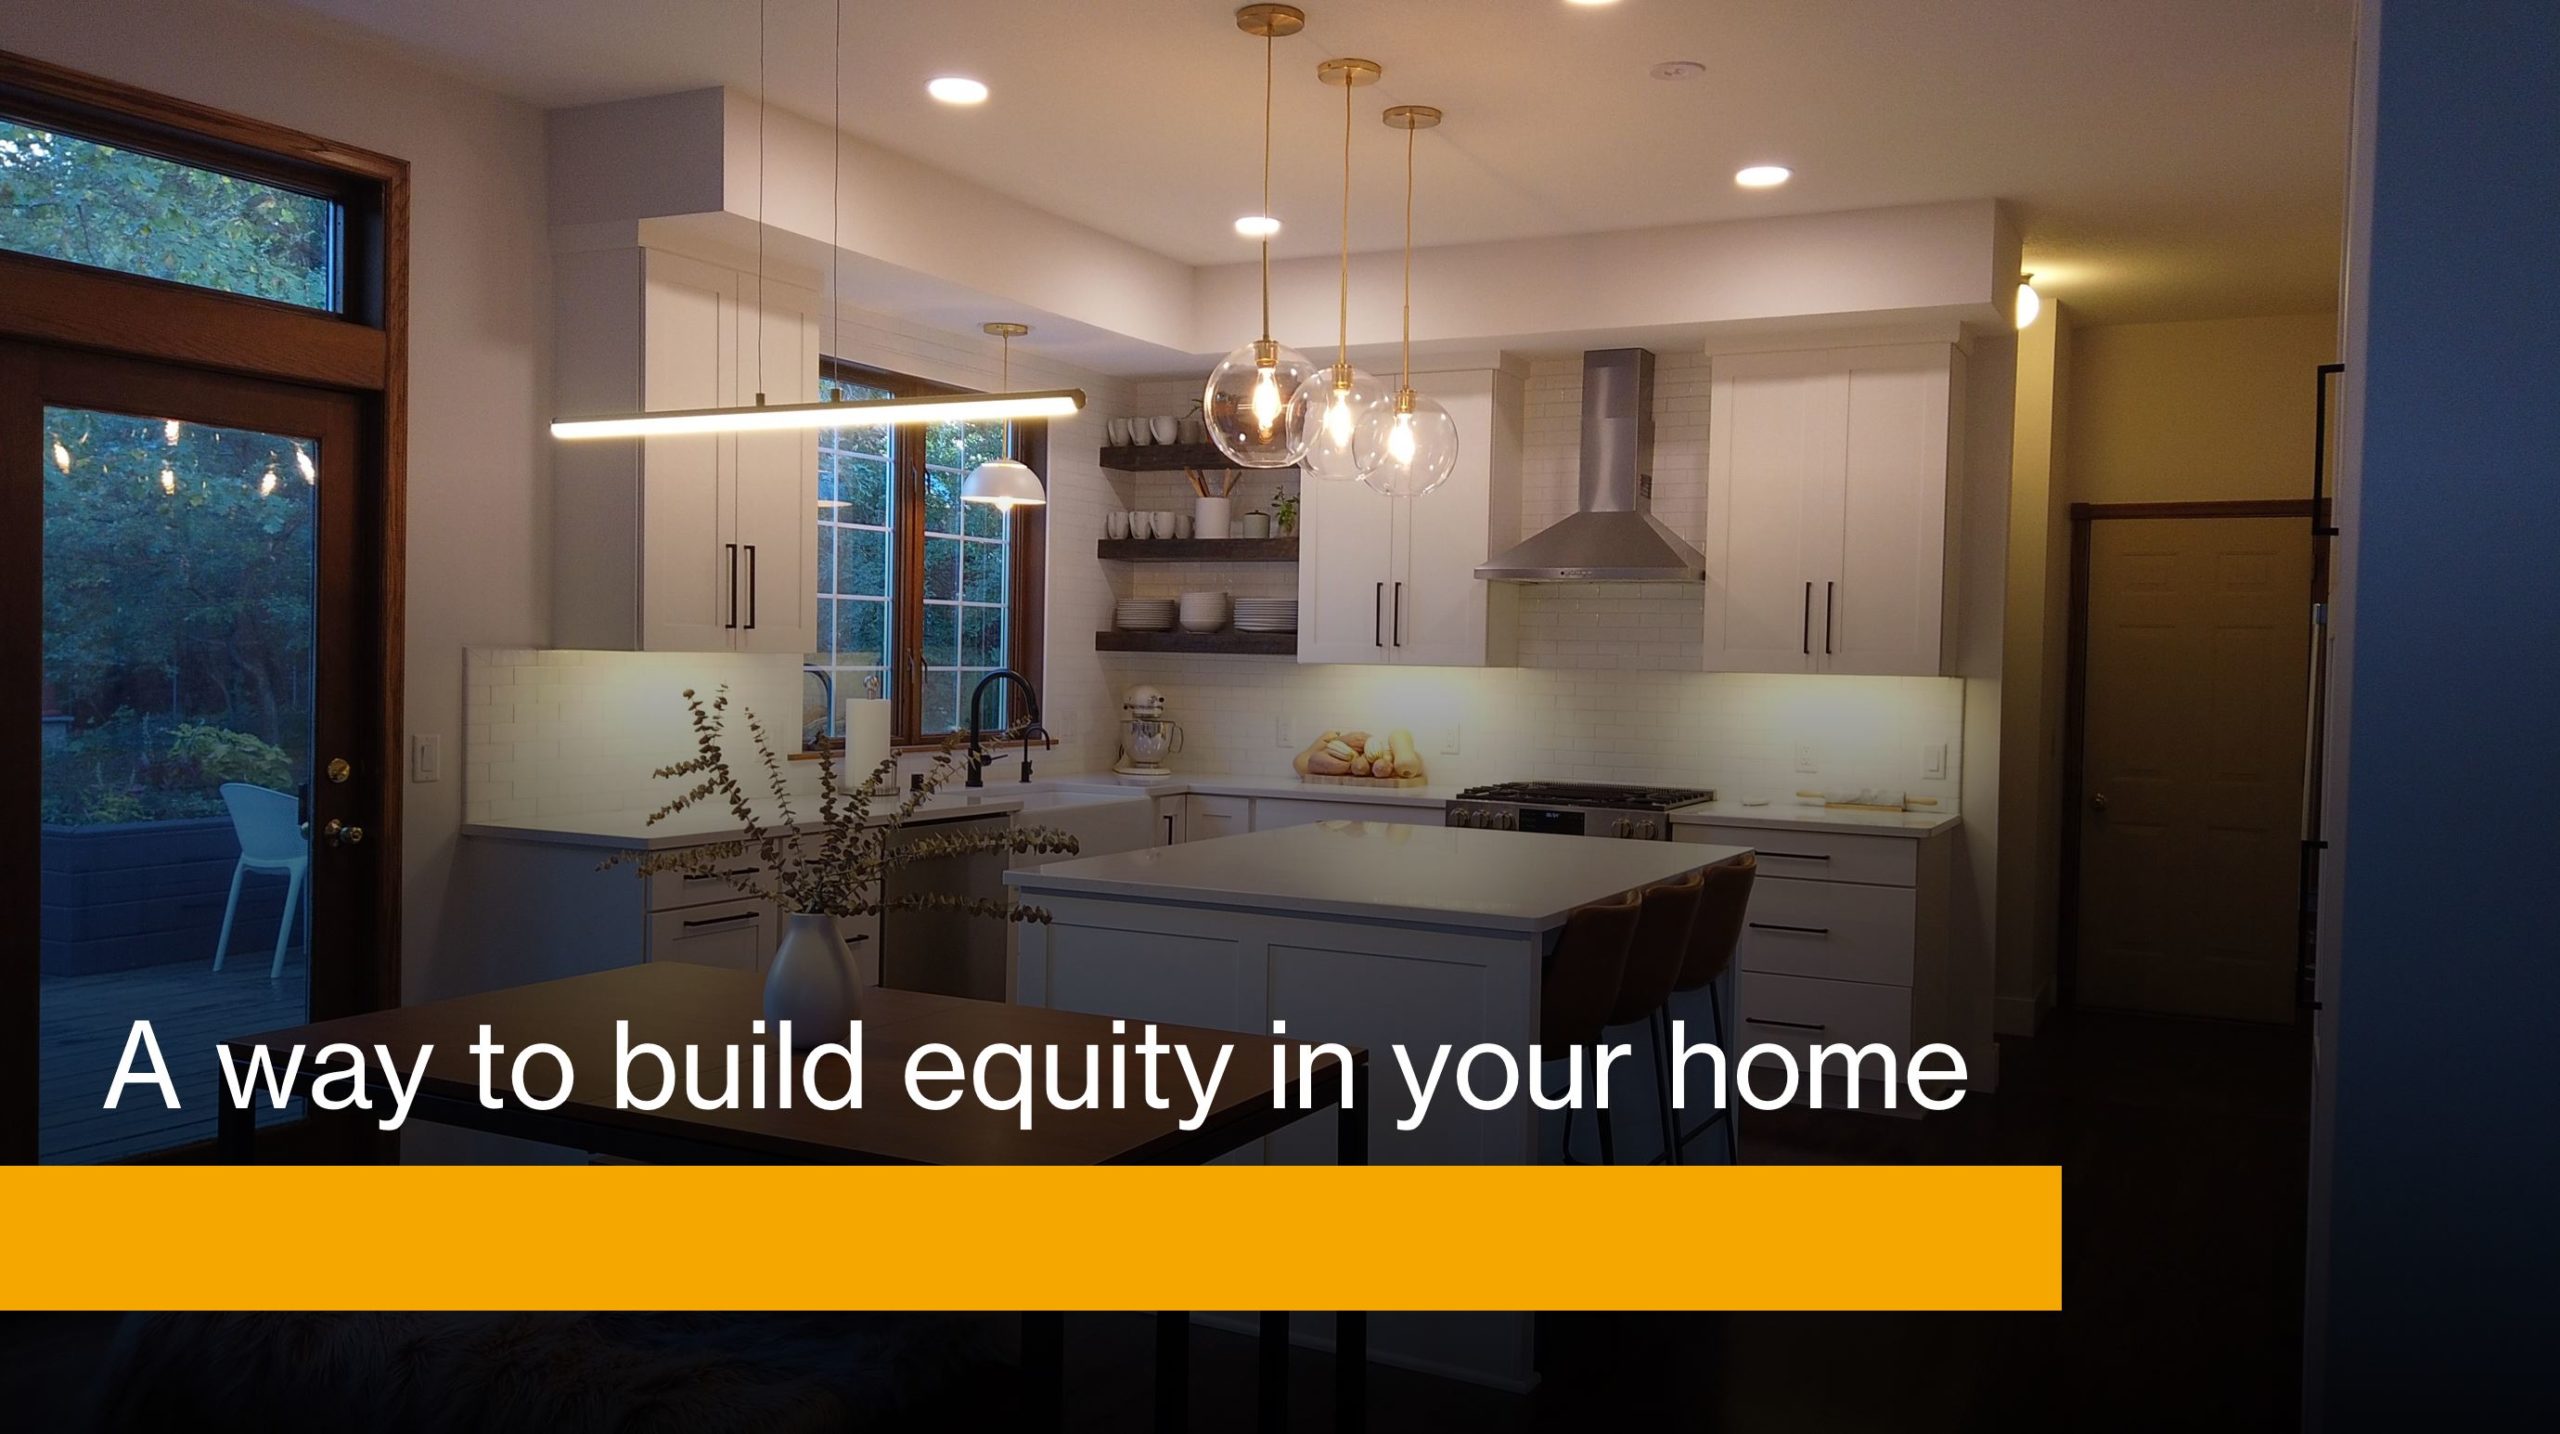 A way to build equity in your home